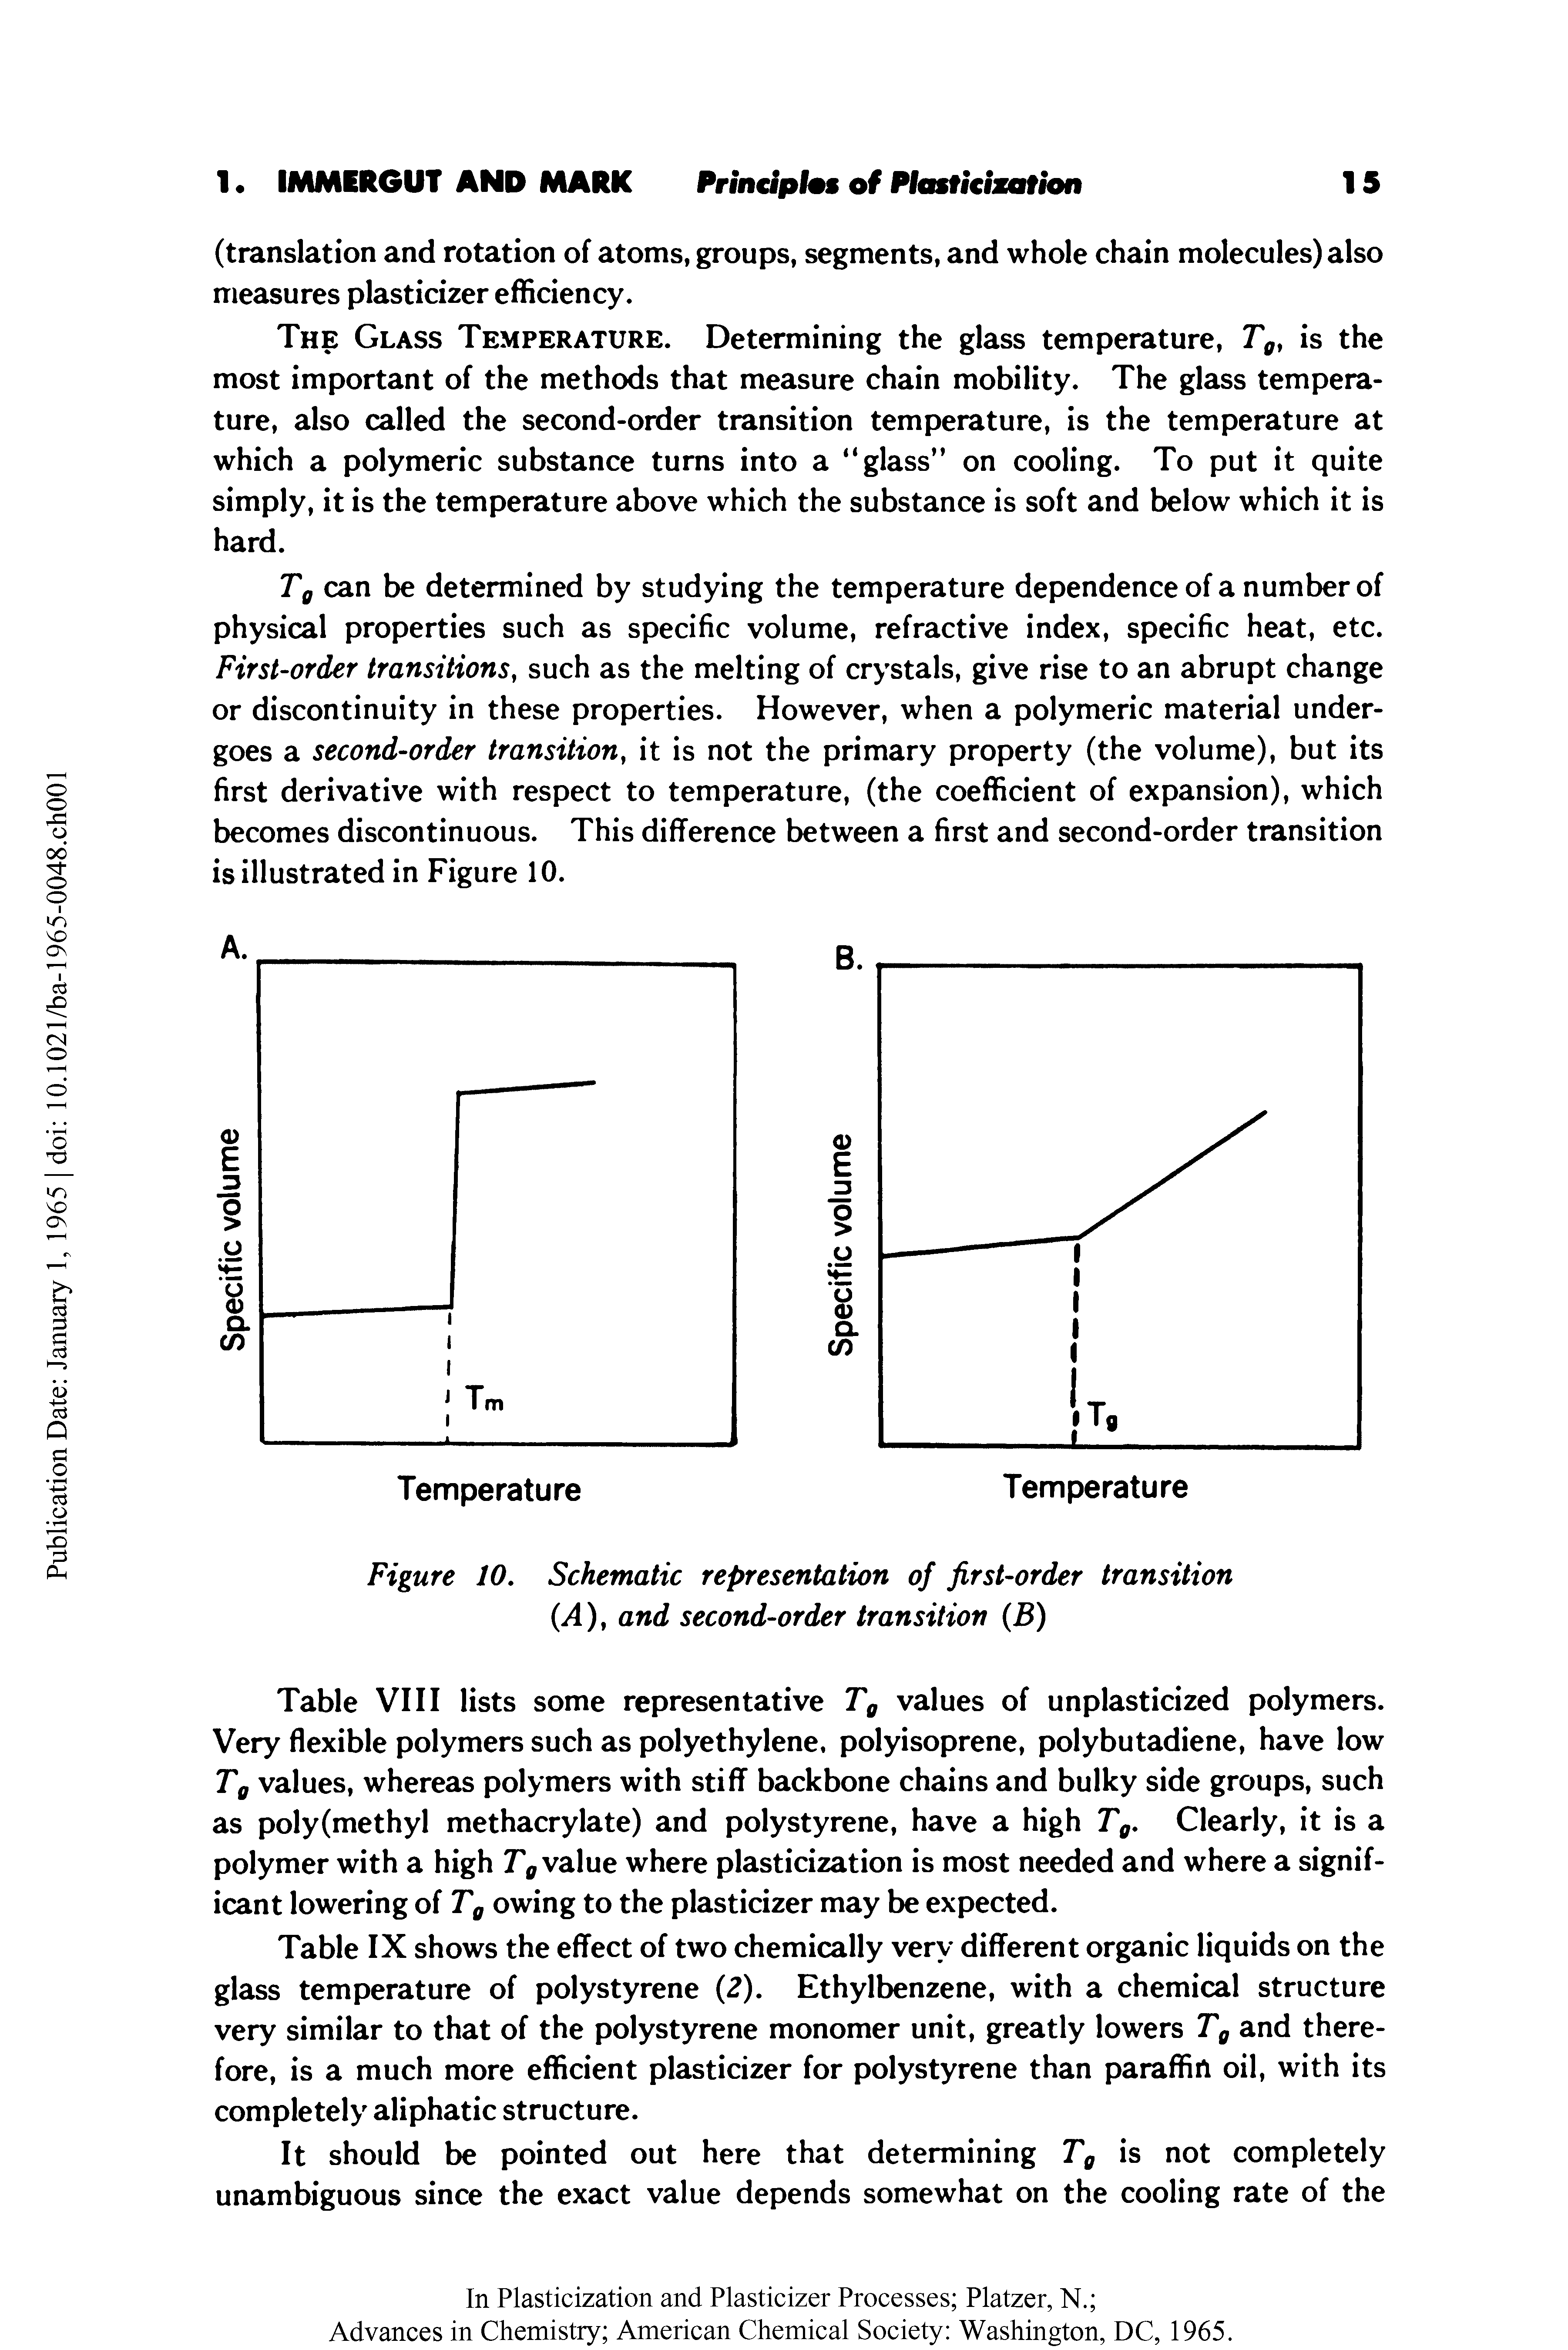 Table IX shows the effect of two chemically very different organic liquids on the glass temperature of polystyrene (2). Ethylbenzene, with a chemical structure very similar to that of the polystyrene monomer unit, greatly lowers Tg and therefore, is a much more efficient plasticizer for polystyrene than paraffin oil, with its completely aliphatic structure.